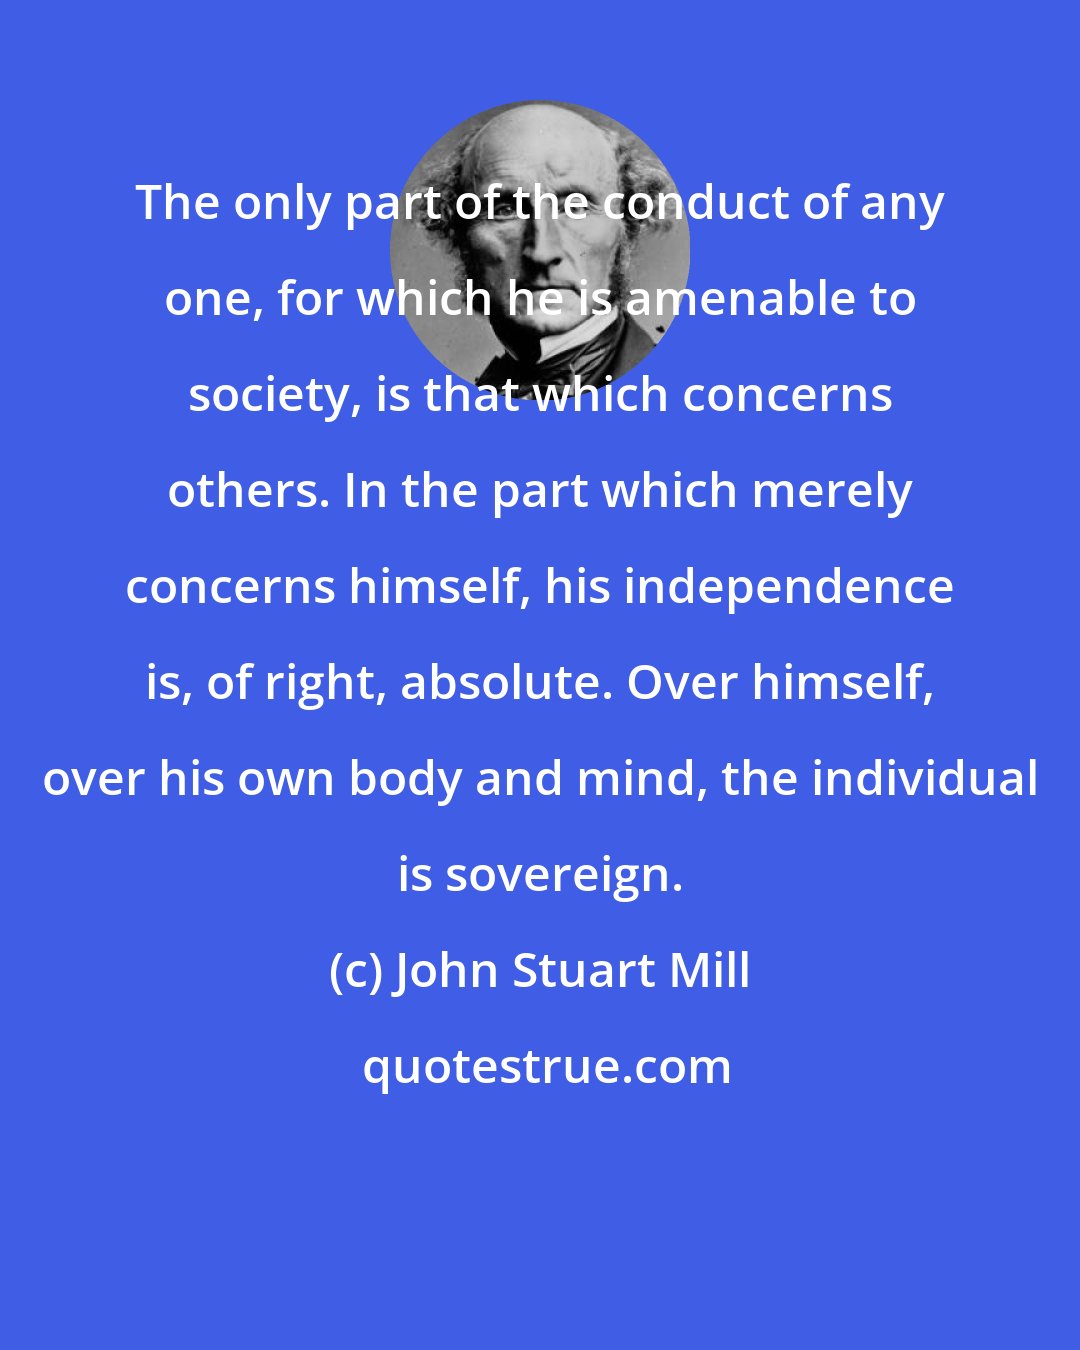 John Stuart Mill: The only part of the conduct of any one, for which he is amenable to society, is that which concerns others. In the part which merely concerns himself, his independence is, of right, absolute. Over himself, over his own body and mind, the individual is sovereign.